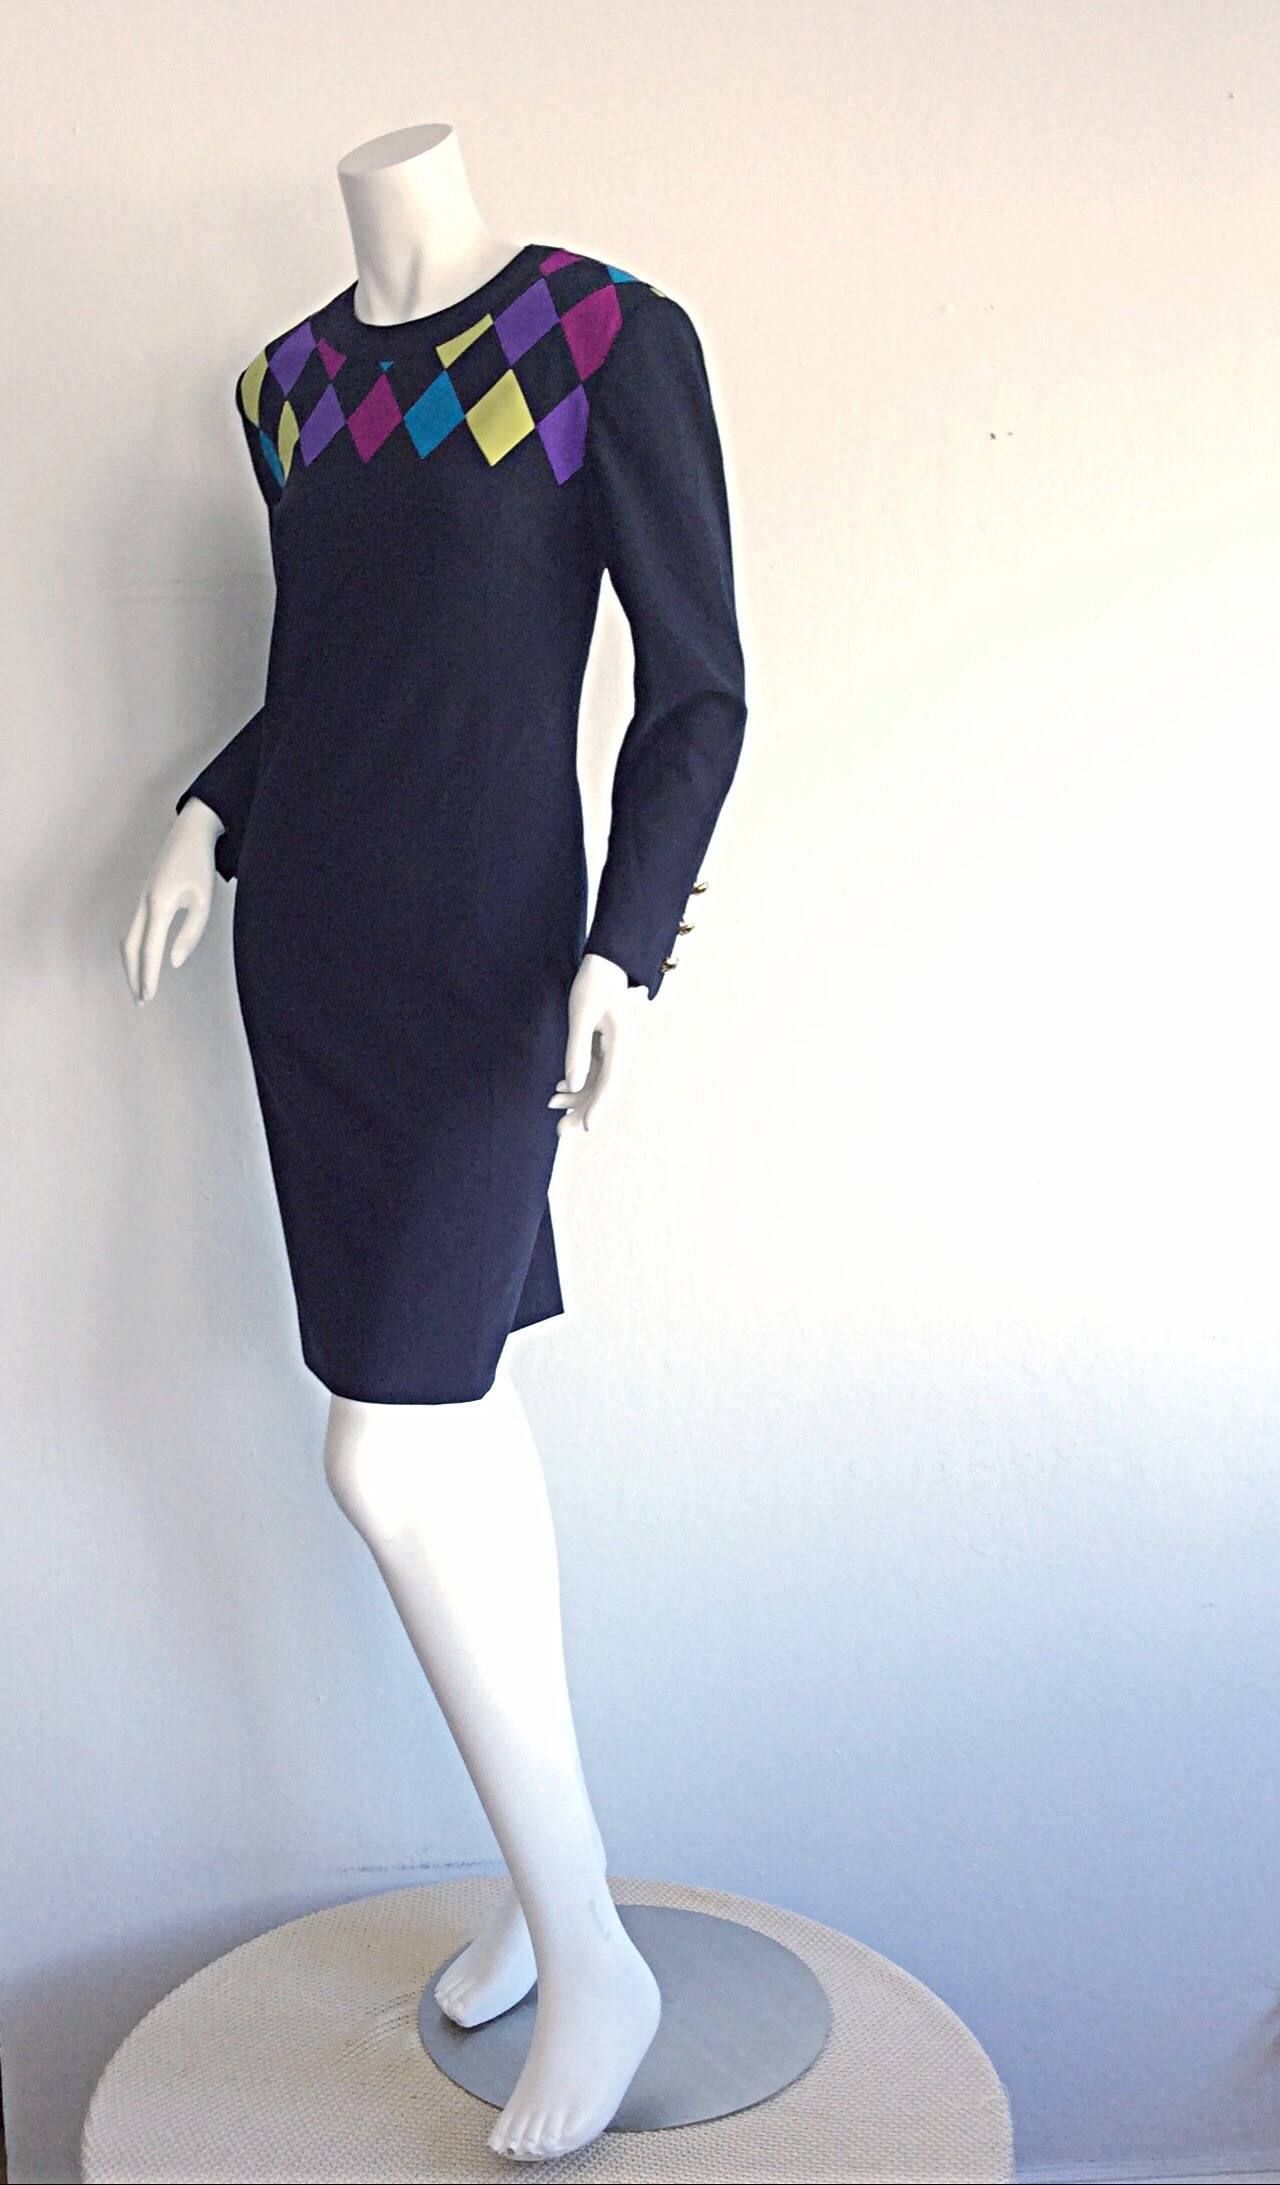 Extremely flattering vintage navy dress by Louis Feraud! Features colorful 'Harlequin' like print, with wonderful vibrant colors! Three mock metal buttons at each cuff. Looks great belted, or alone. Fully lined. In great condition
Made in West